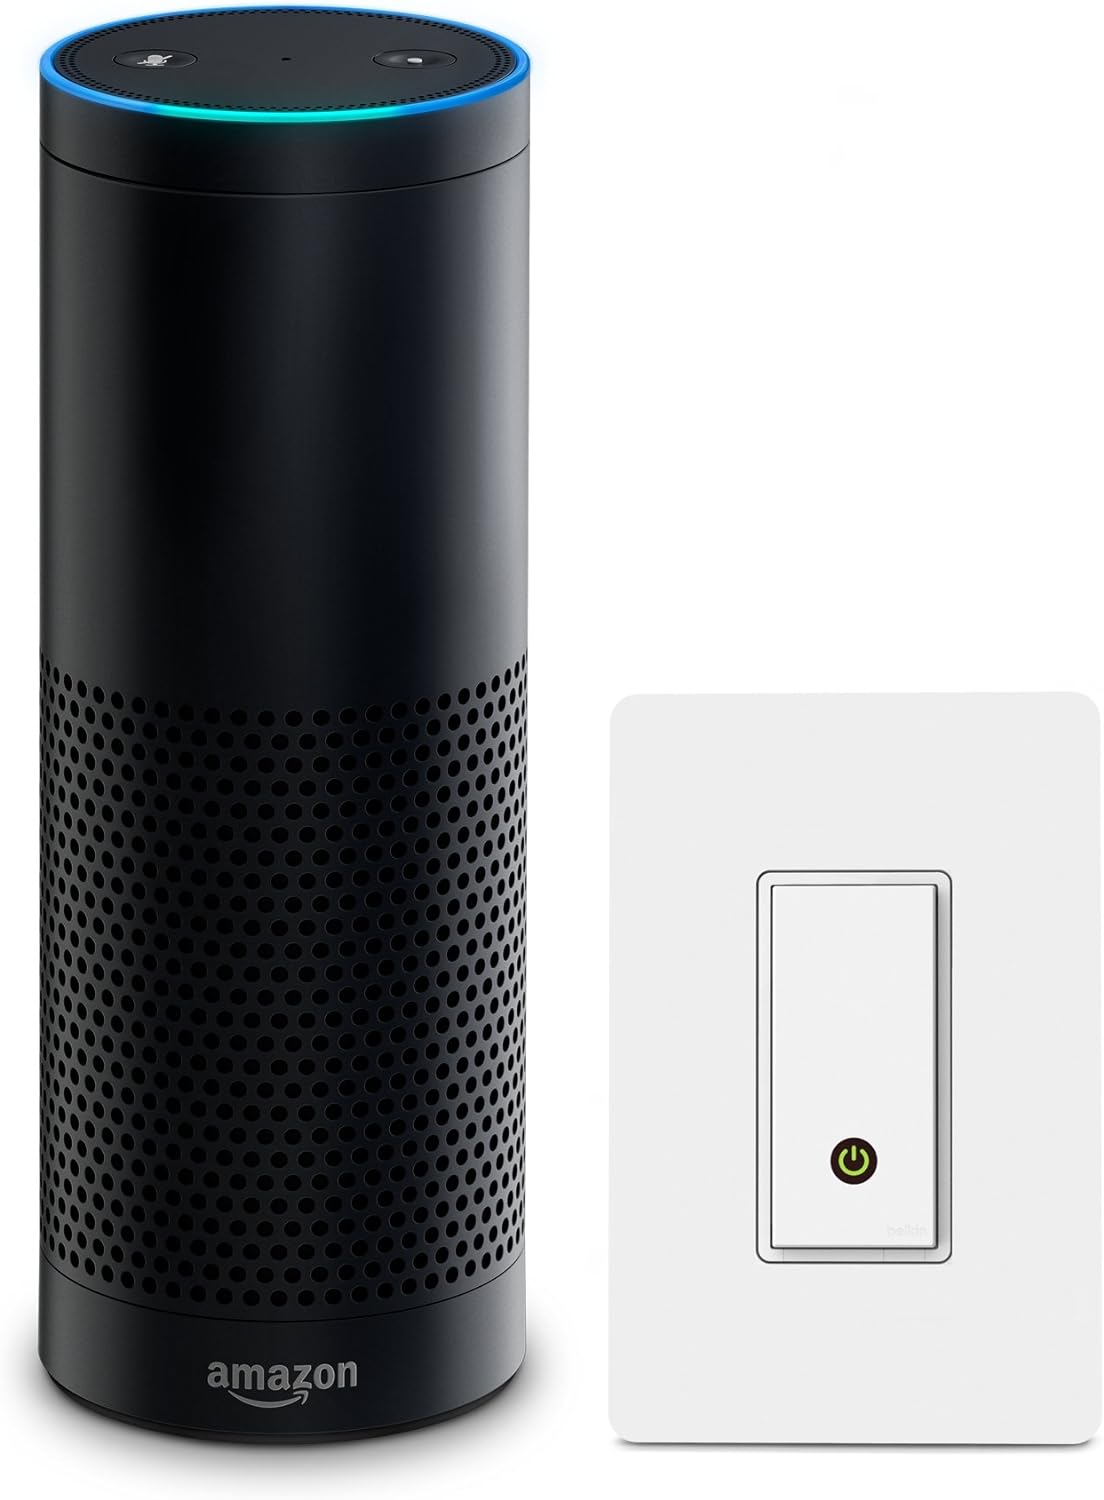 Wemo F7C030fc Light Switch, WiFi enabled, Works with Alexa and the Google Assistant